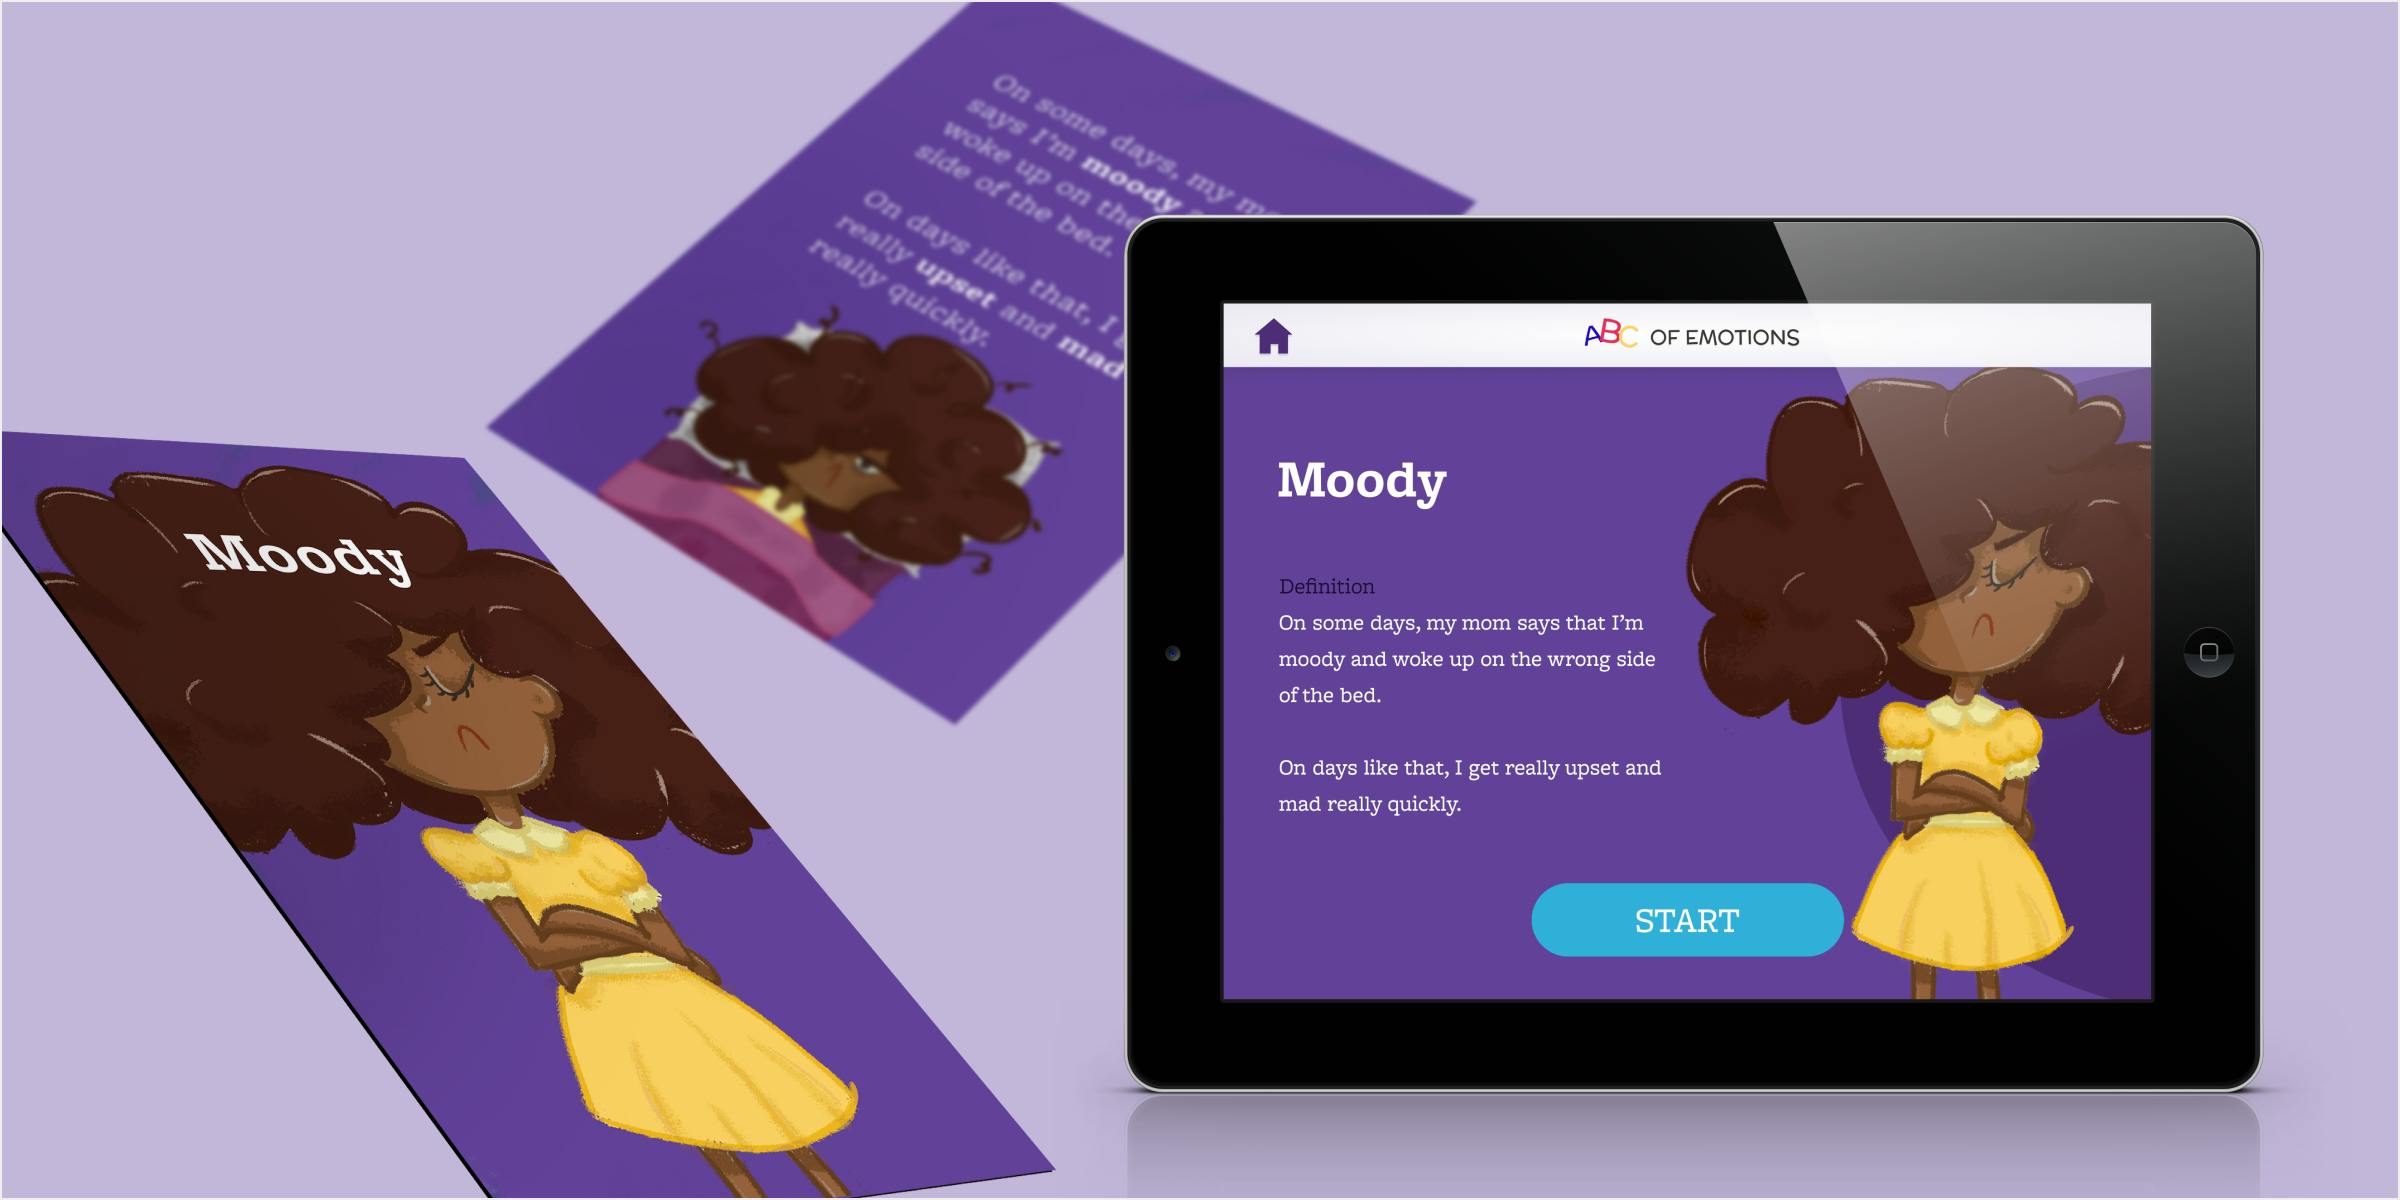 Mockup of the front and back of the card designed for Moody and an iPad with the first page of the interaction displayed